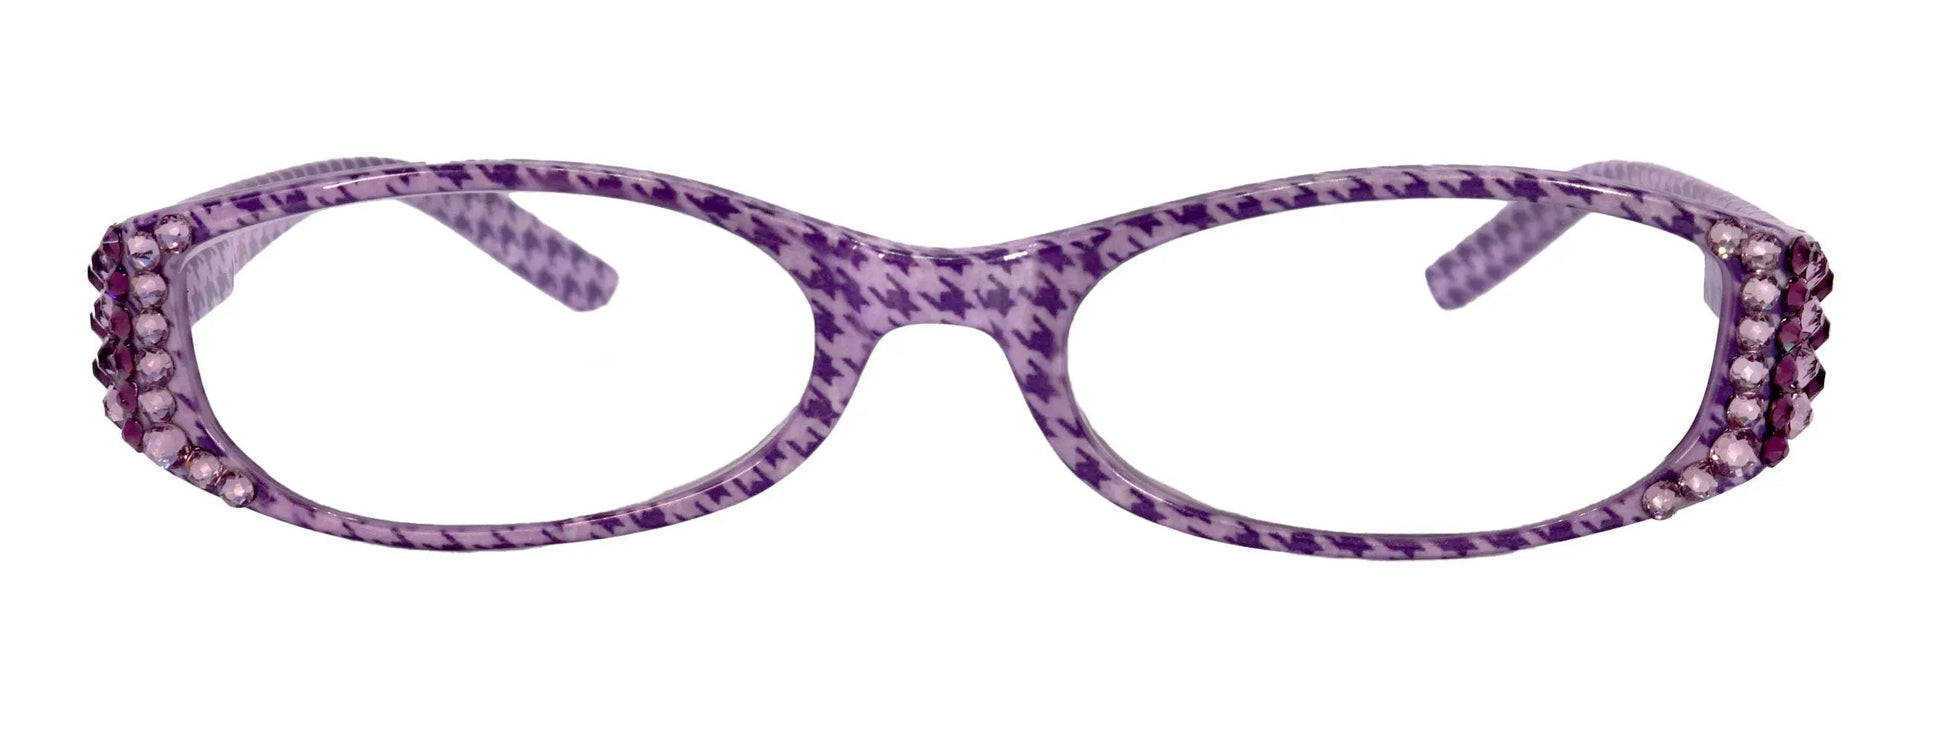 The Scottish, (Bling) Reading Glasses Embellished w (Amethyst)   (Hounds Tooth Check) Rectangular (Purple) NY Fifth Avenue 